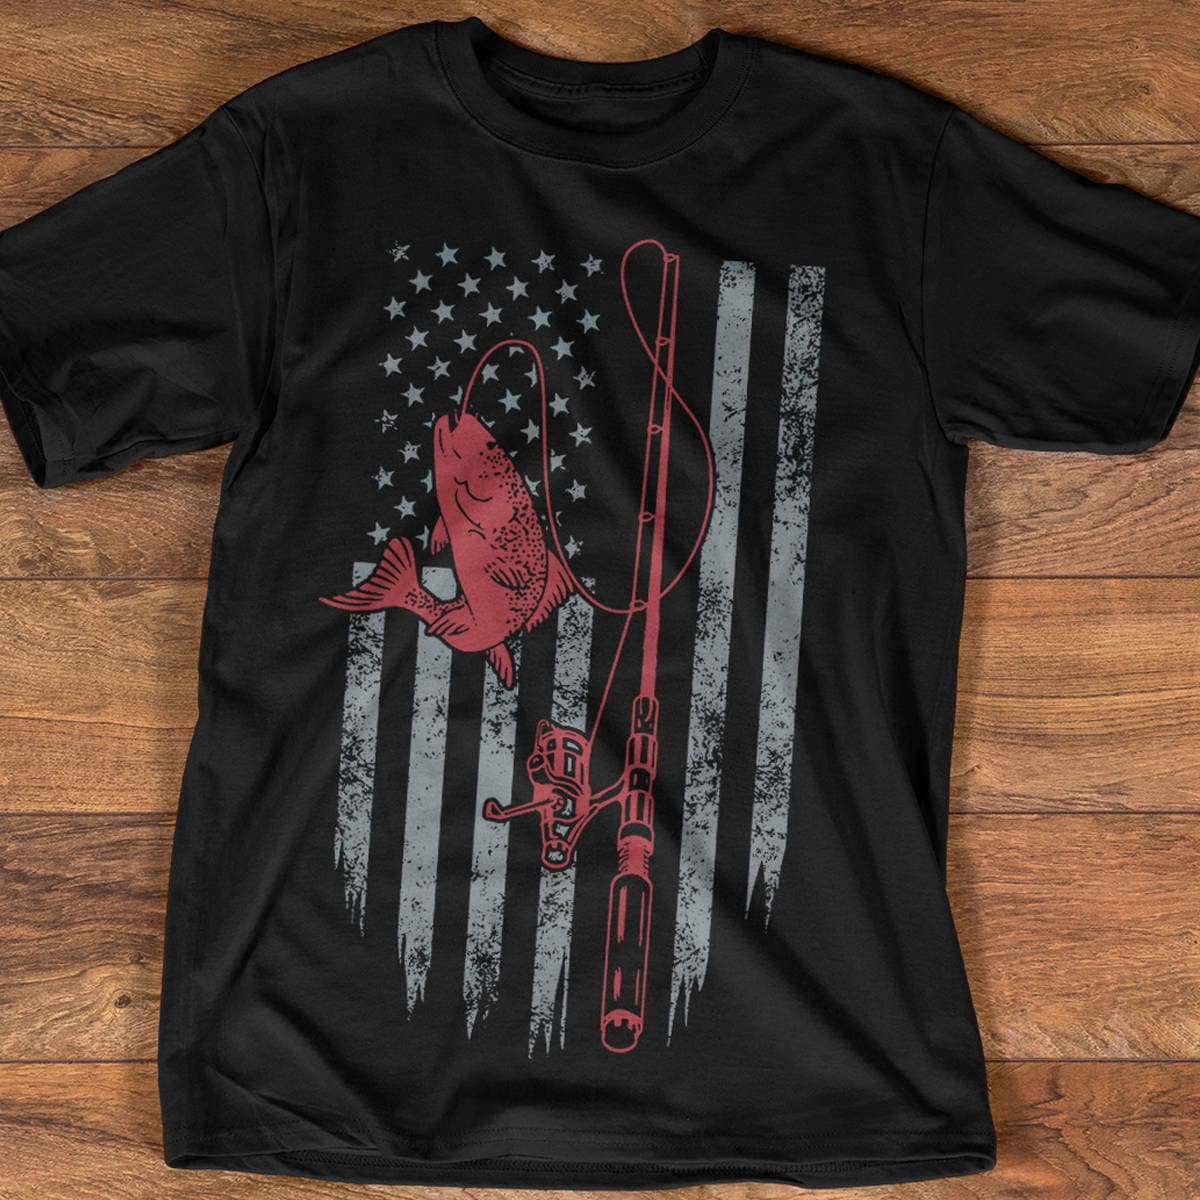 Fishing T-shirt With American Flag, Fly Fishing Shirt, Fishing Gear,  Fishing Gifts Idea for American Fishers, Father's Day Fishing, TP2008 -   Canada